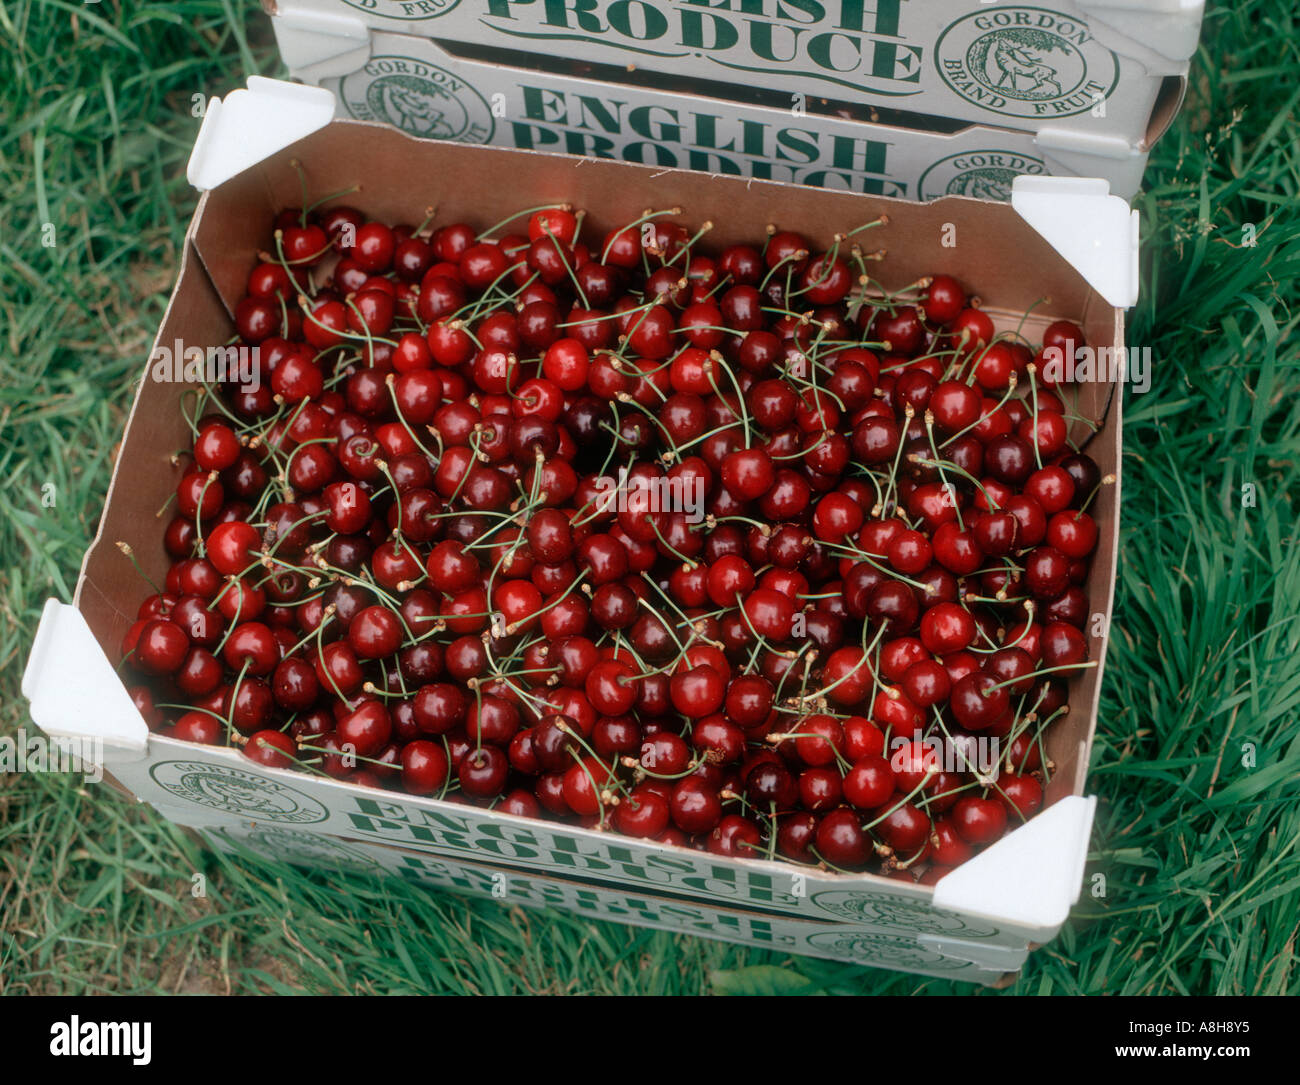 Boxed ripe Early Rivers cherries marked English Produce Stock Photo